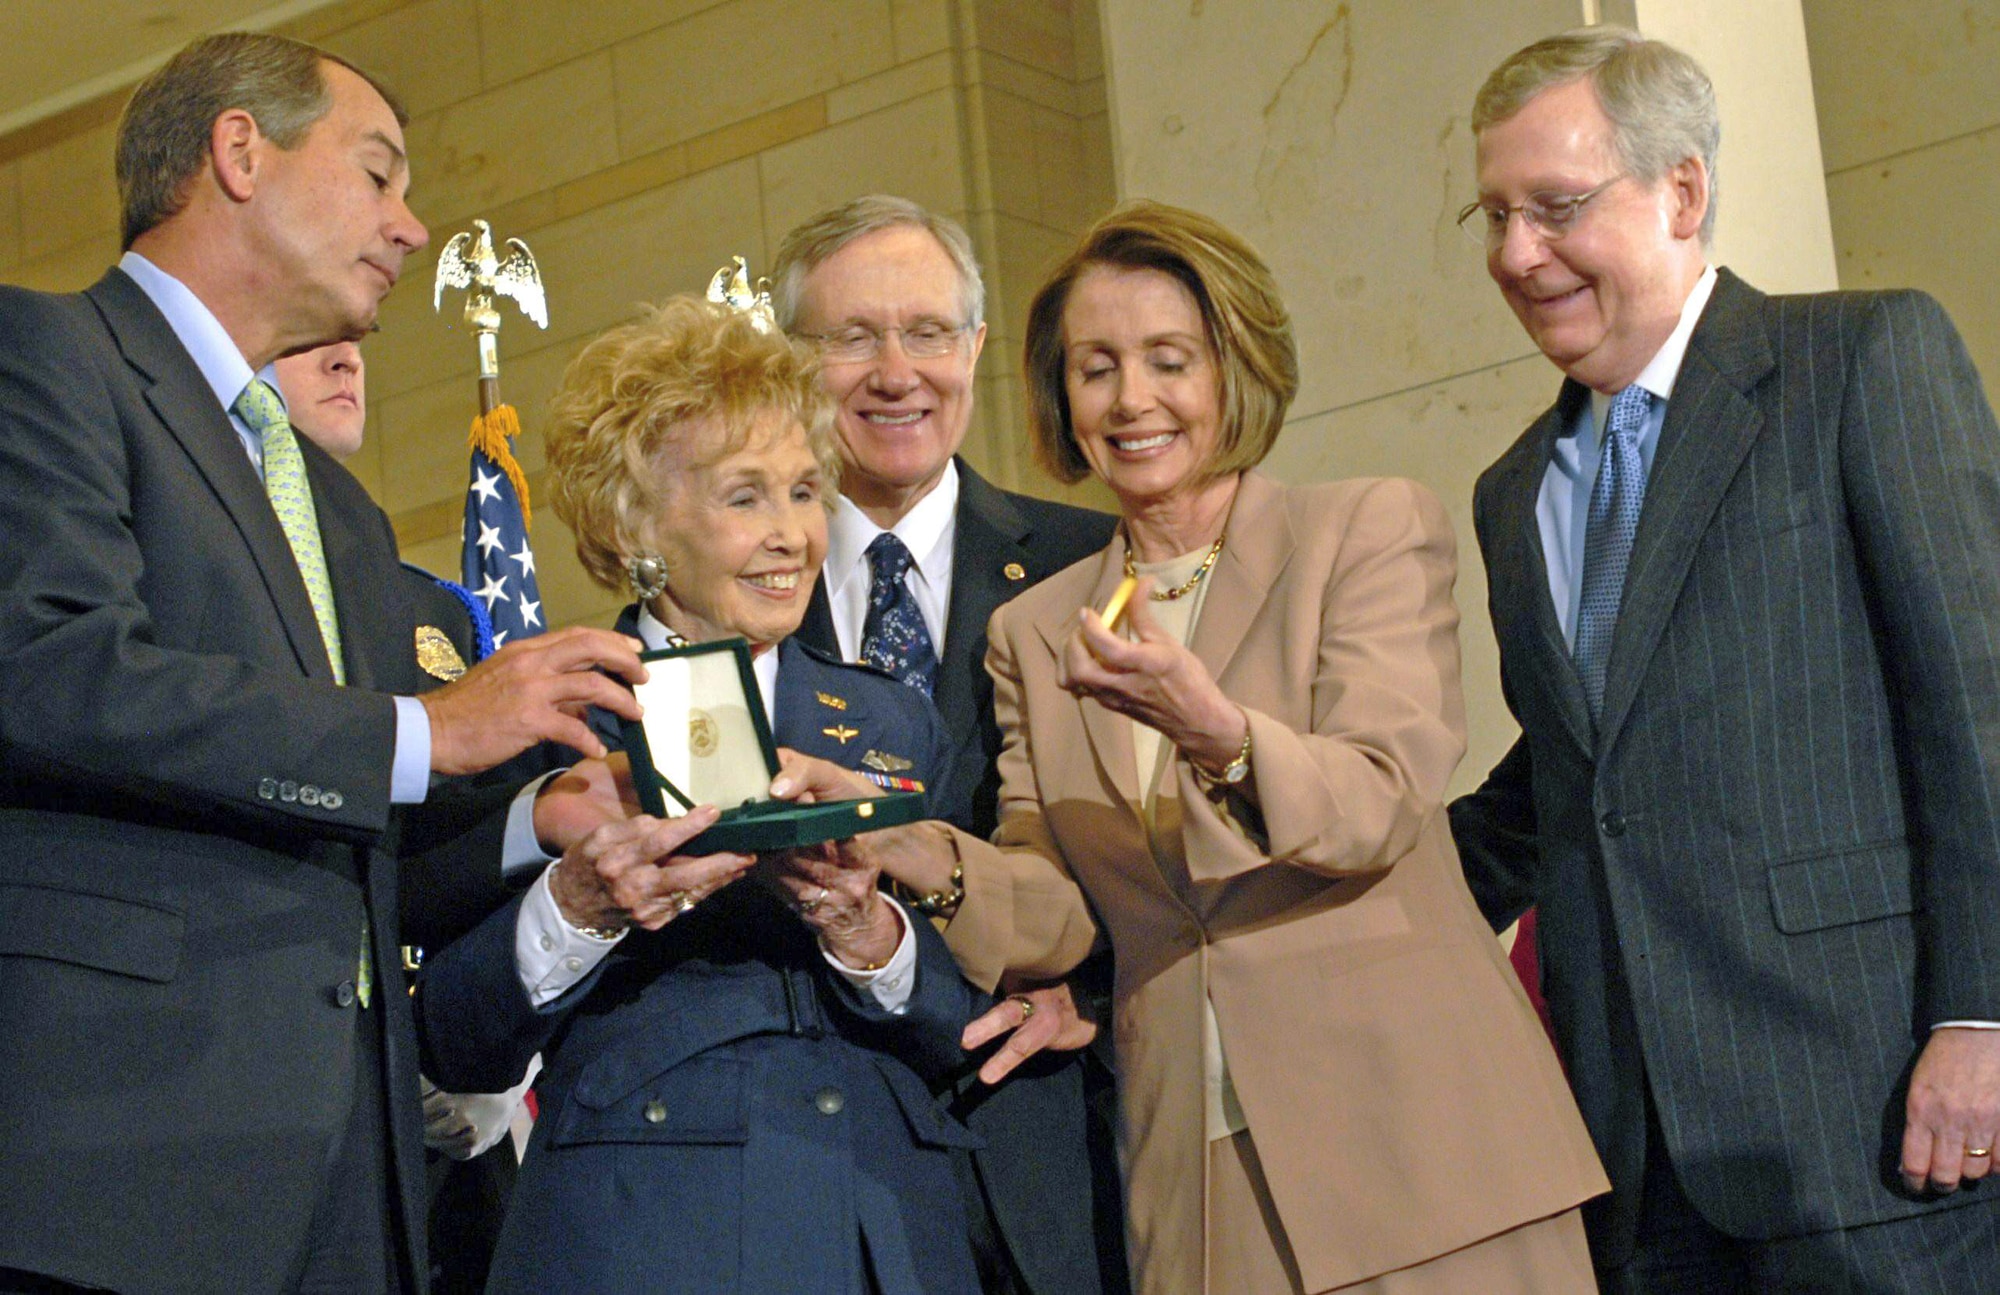 Deanie Parrish, one of the World War II Women Airforce Service Pilots and associate director of Wings Across America, accepts the Congressional Gold Medal on behalf of her fellow WASPs at the Capitol March 10, 2010. Presenting the medal are Speaker Nancy Pelosi, Rep. John Boehner, Sen. Harry Reid and Sen. Mitch McConnell. More than 200 WASPs attended the event, many of them wearing their World War II-era uniforms. (U.S. Air Force photo/Staff Sgt. J.G. Buzanowski)